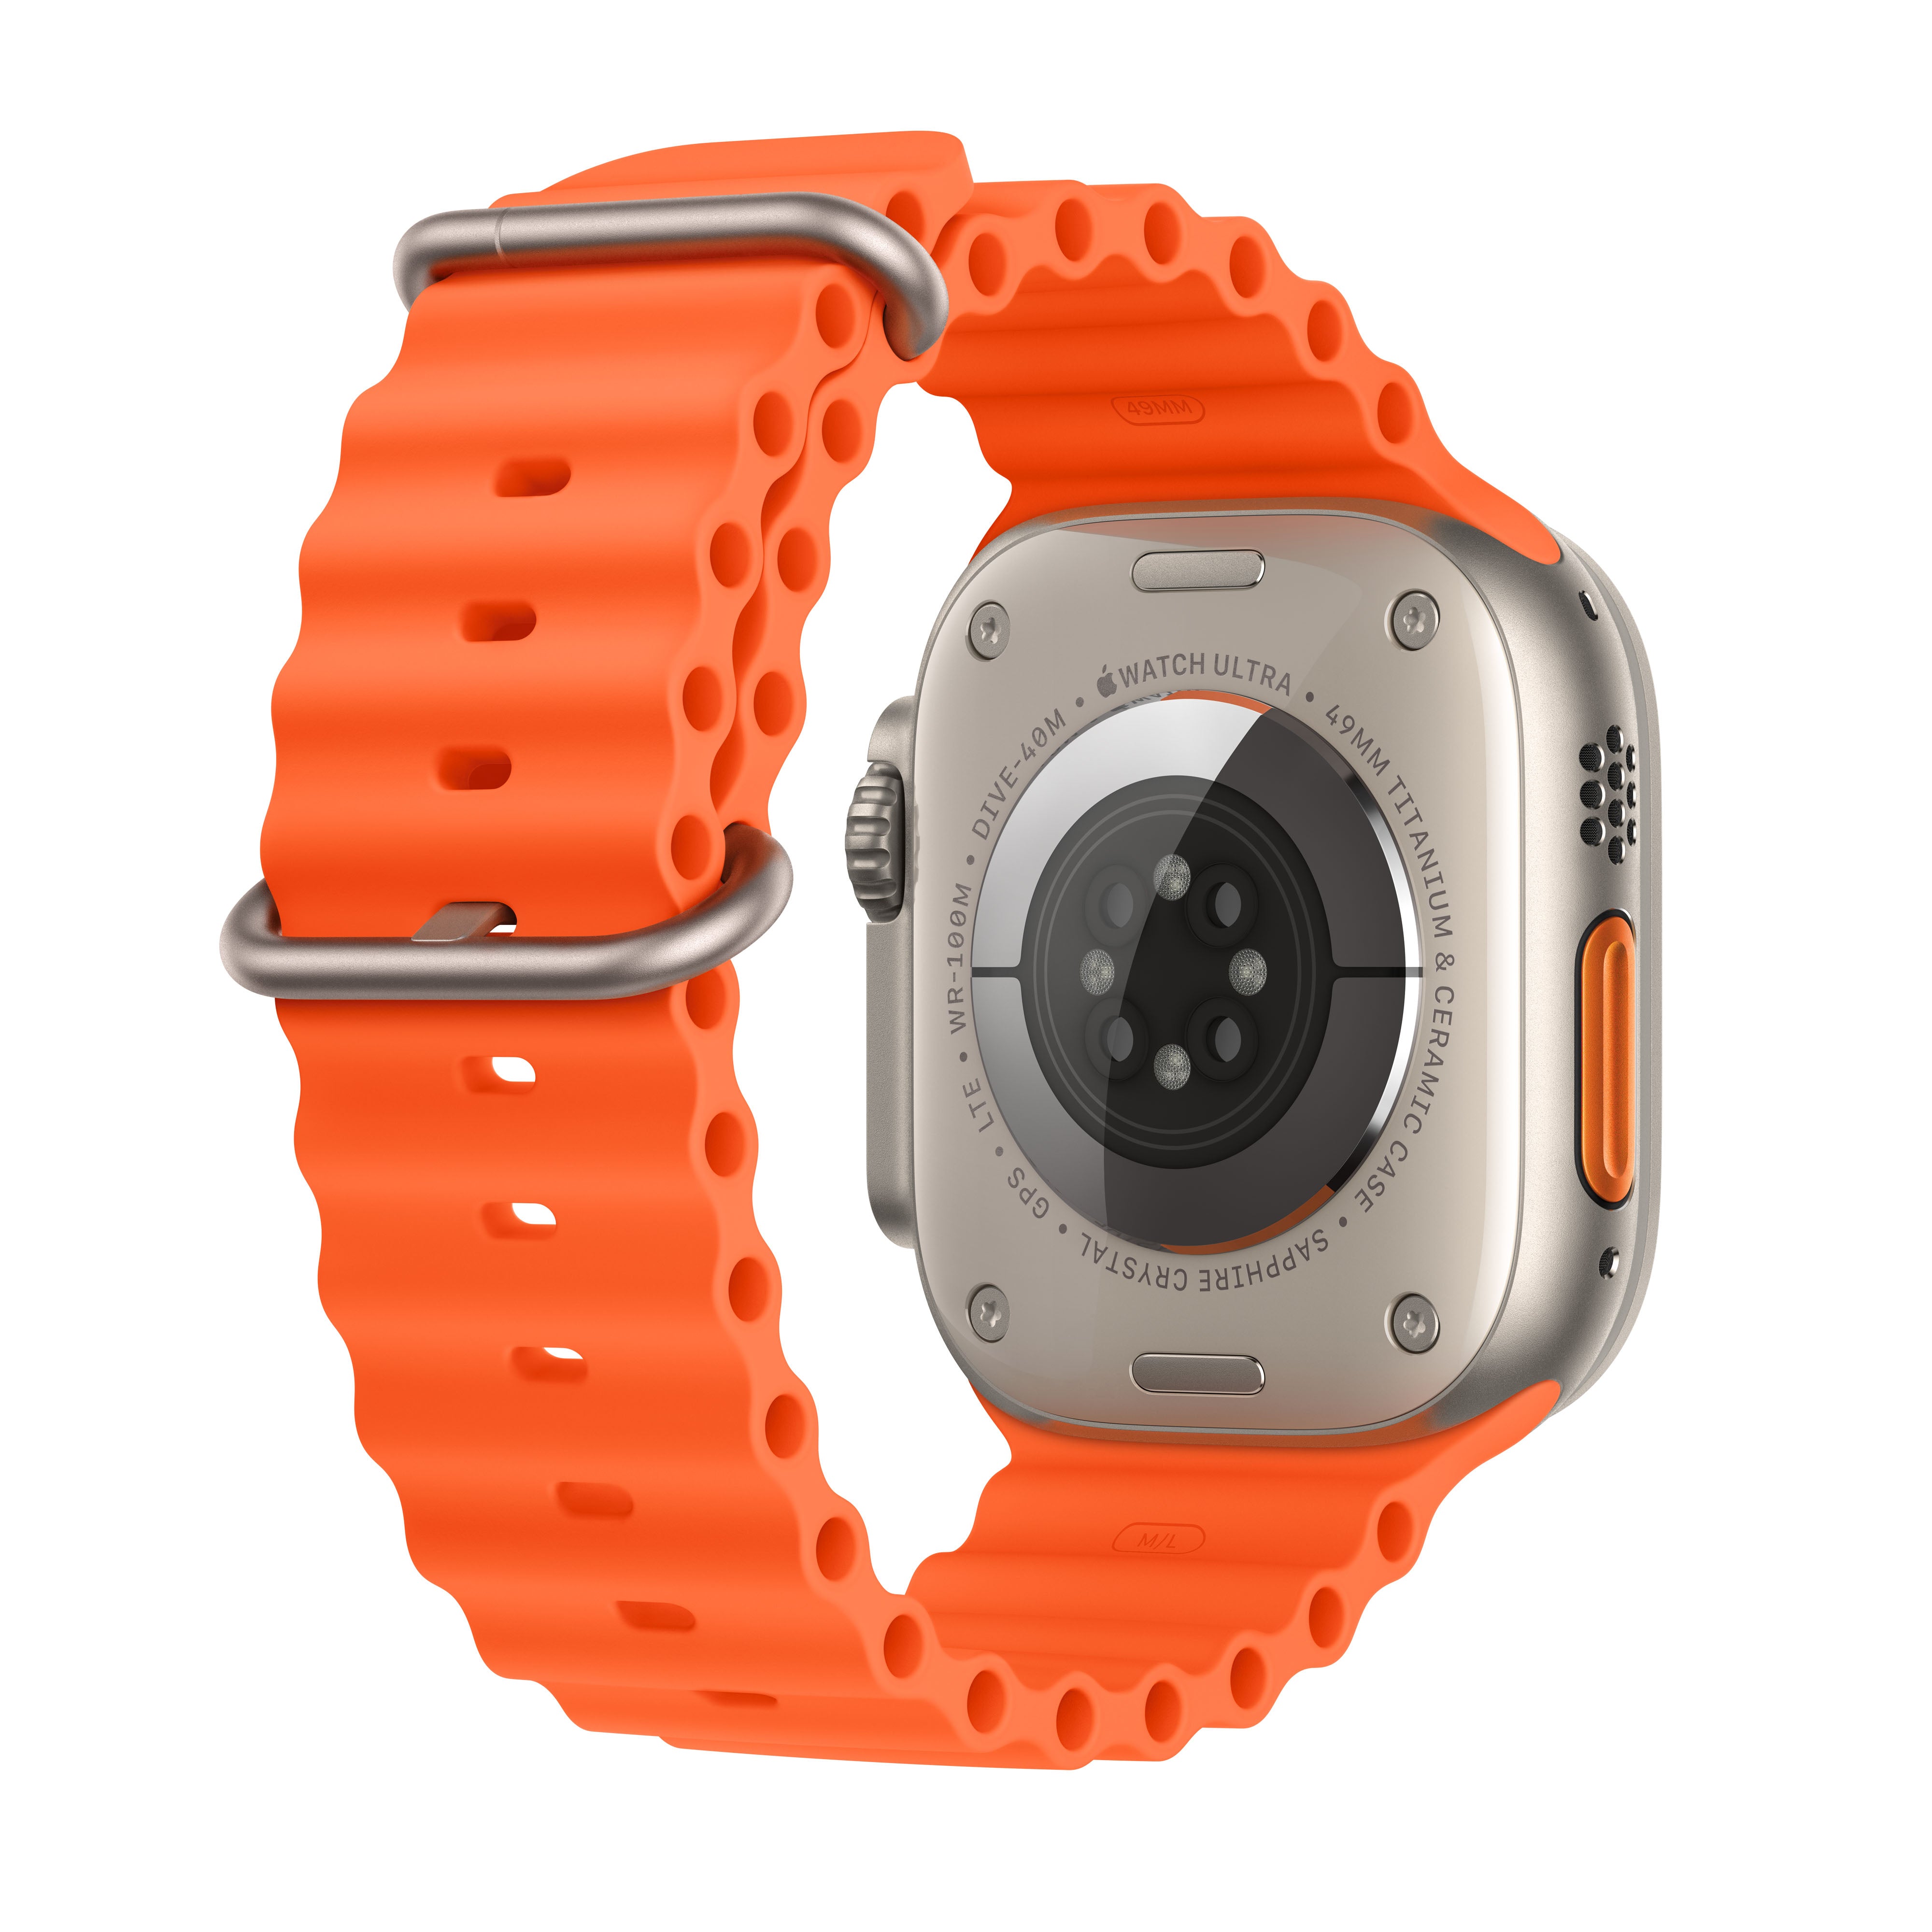 Apple Watch Orange 2 + Ultra GPS Namibia Oce Titanium 49mm Case - Cellular, with iStore